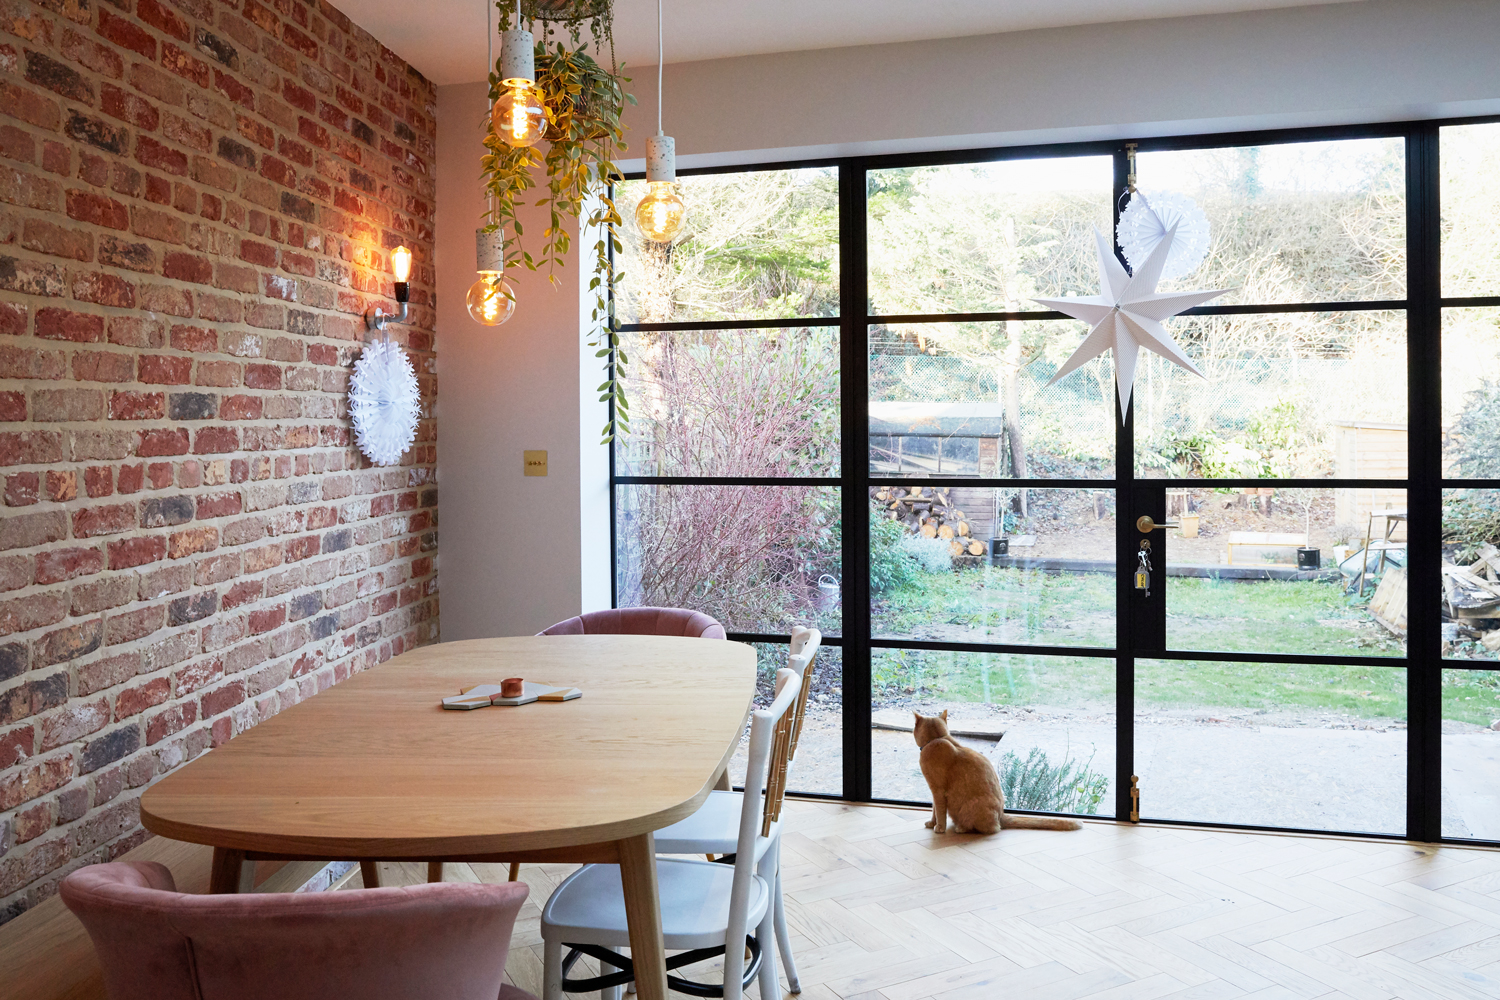 Cat looks out of Crittall style doors in front of modern oak dining table and upholstered chairs